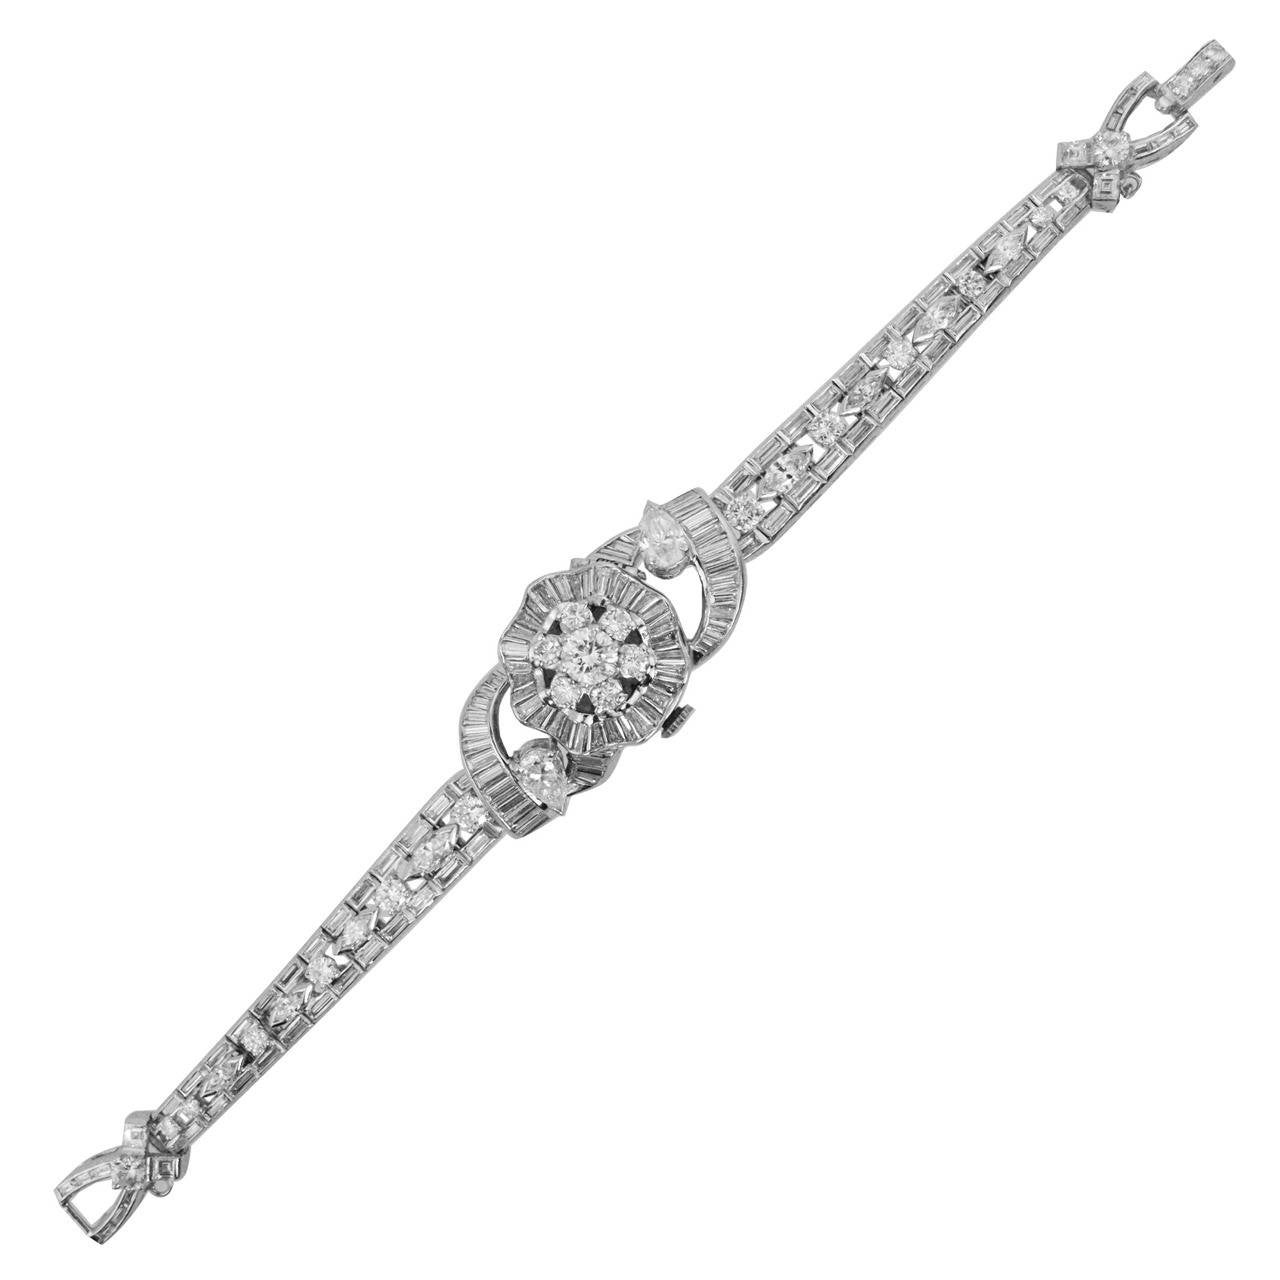 Omega Lady's Platinum and Diamond Bracelet Watch with Concealed DIal